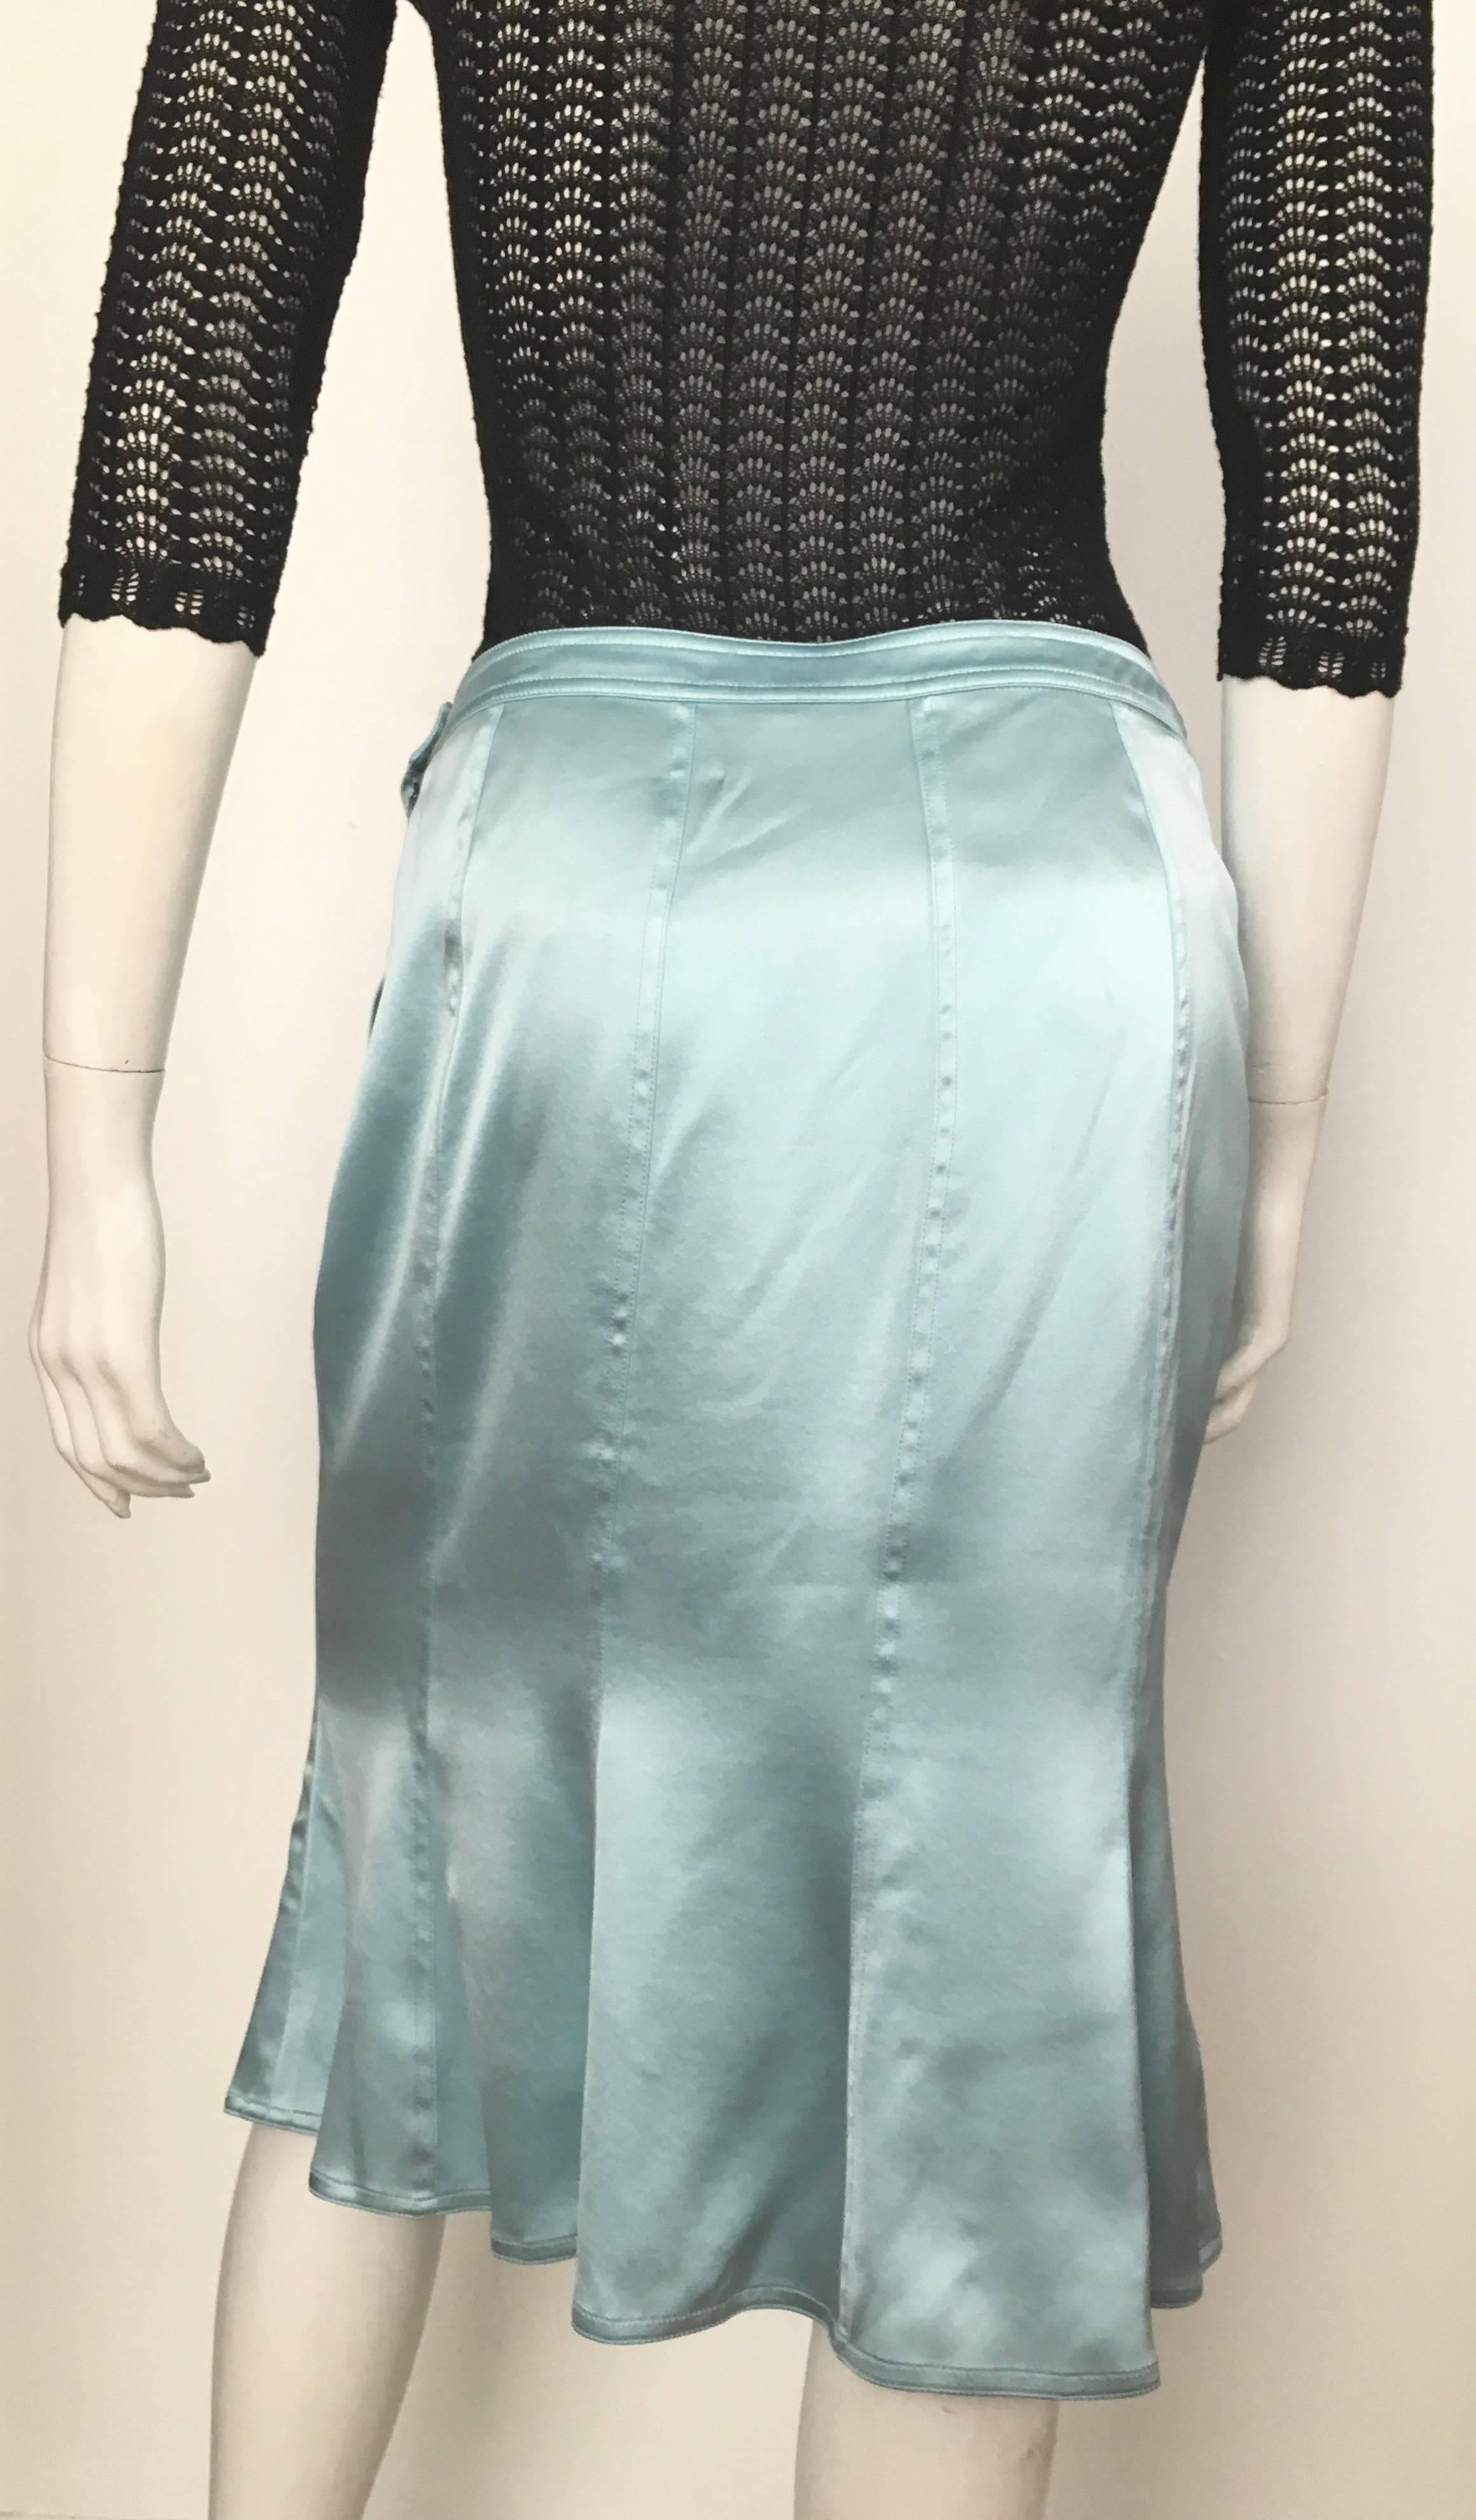 Yves Saint Laurent by Tom Ford Aqua Silk Skirt Size 10  In Excellent Condition For Sale In Atlanta, GA